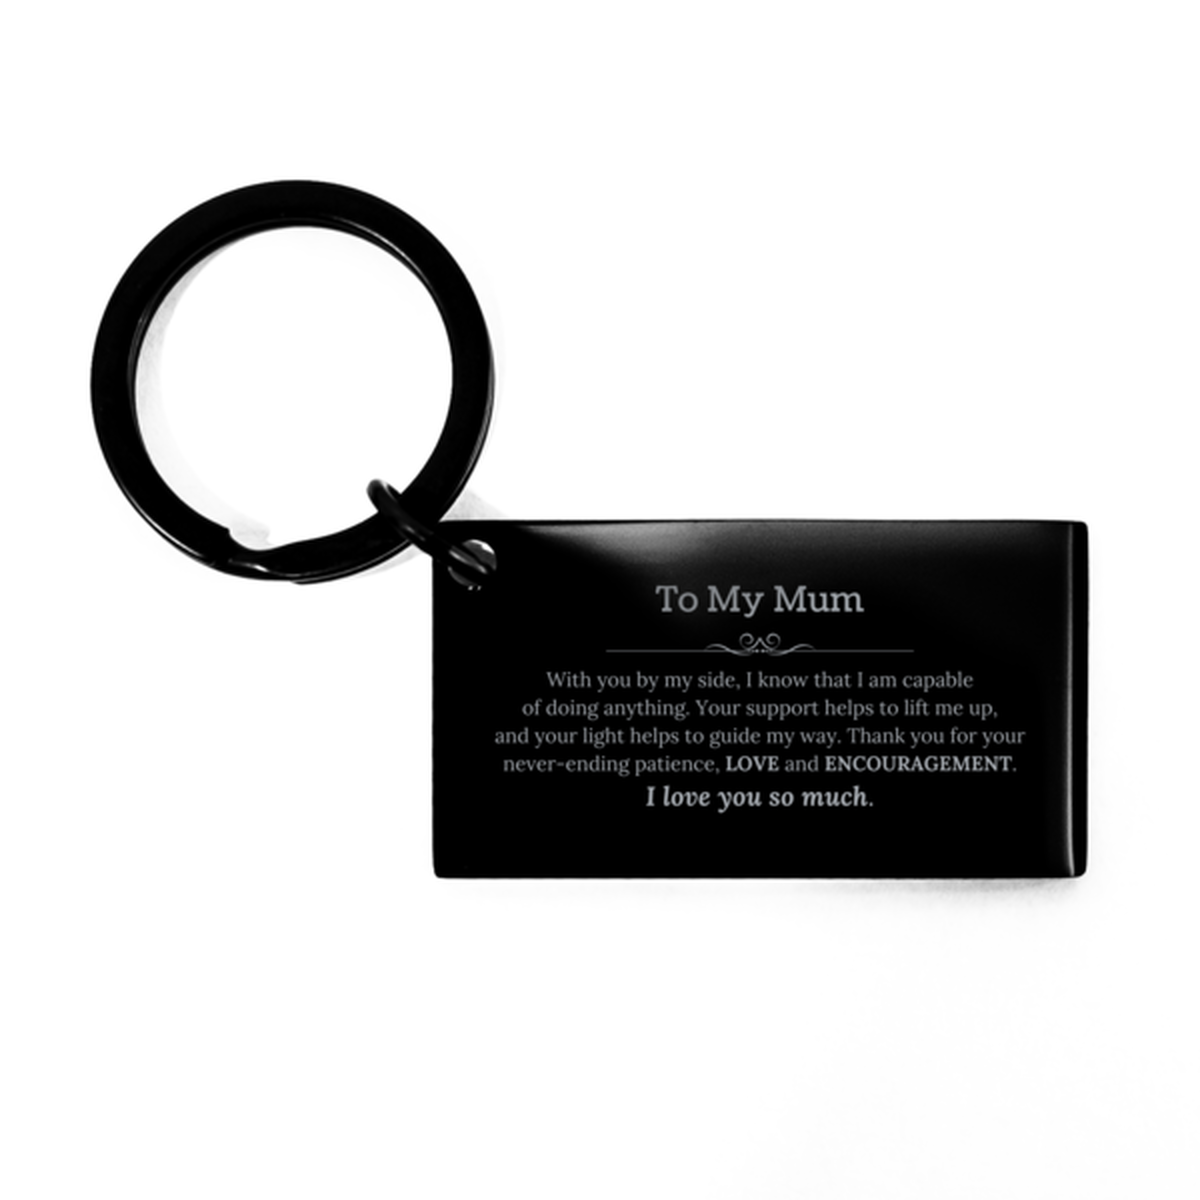 Appreciation Mum Keychain Gifts, To My Mum Birthday Christmas Wedding Keepsake Gifts for Mum With you by my side, I know that I am capable of doing anything. I love you so much